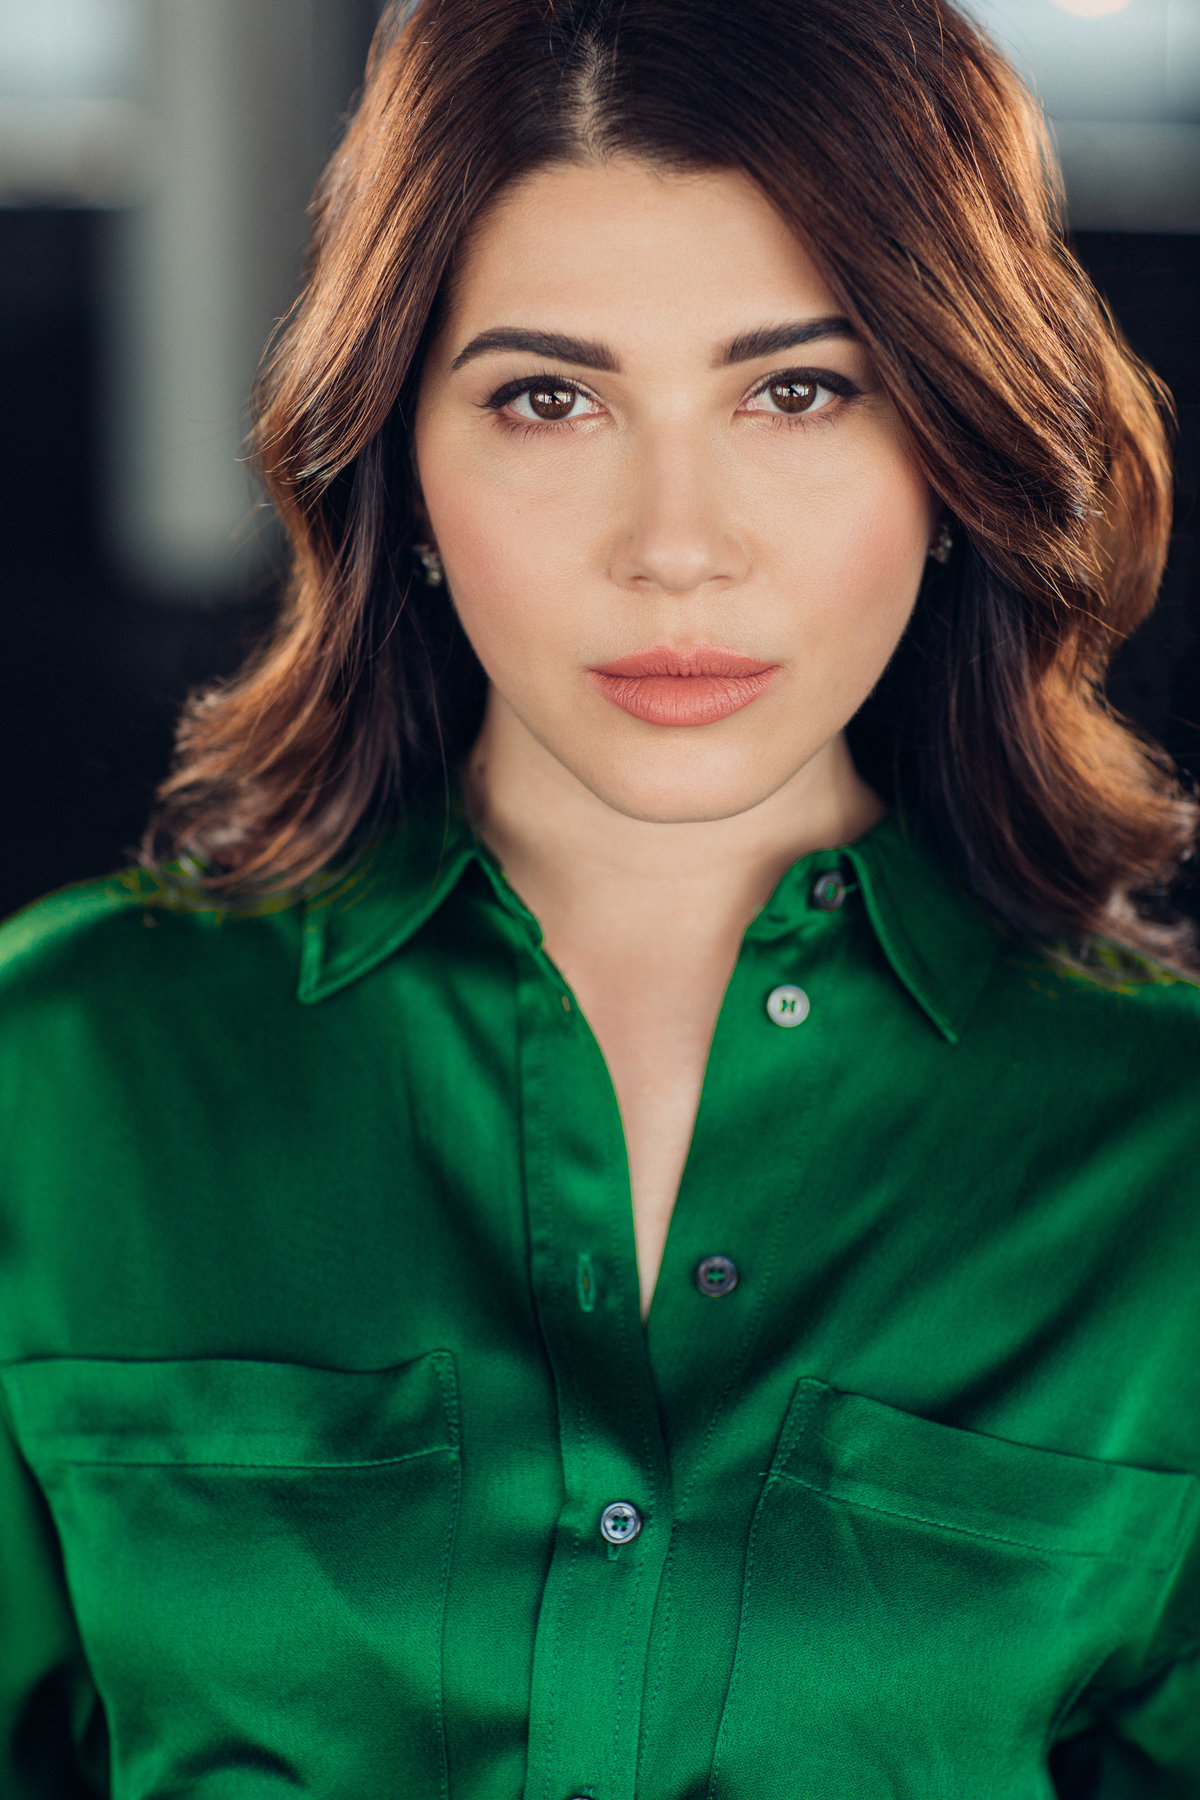 Headshot Photograph Of Young Woman In Green Polo Los Angeles